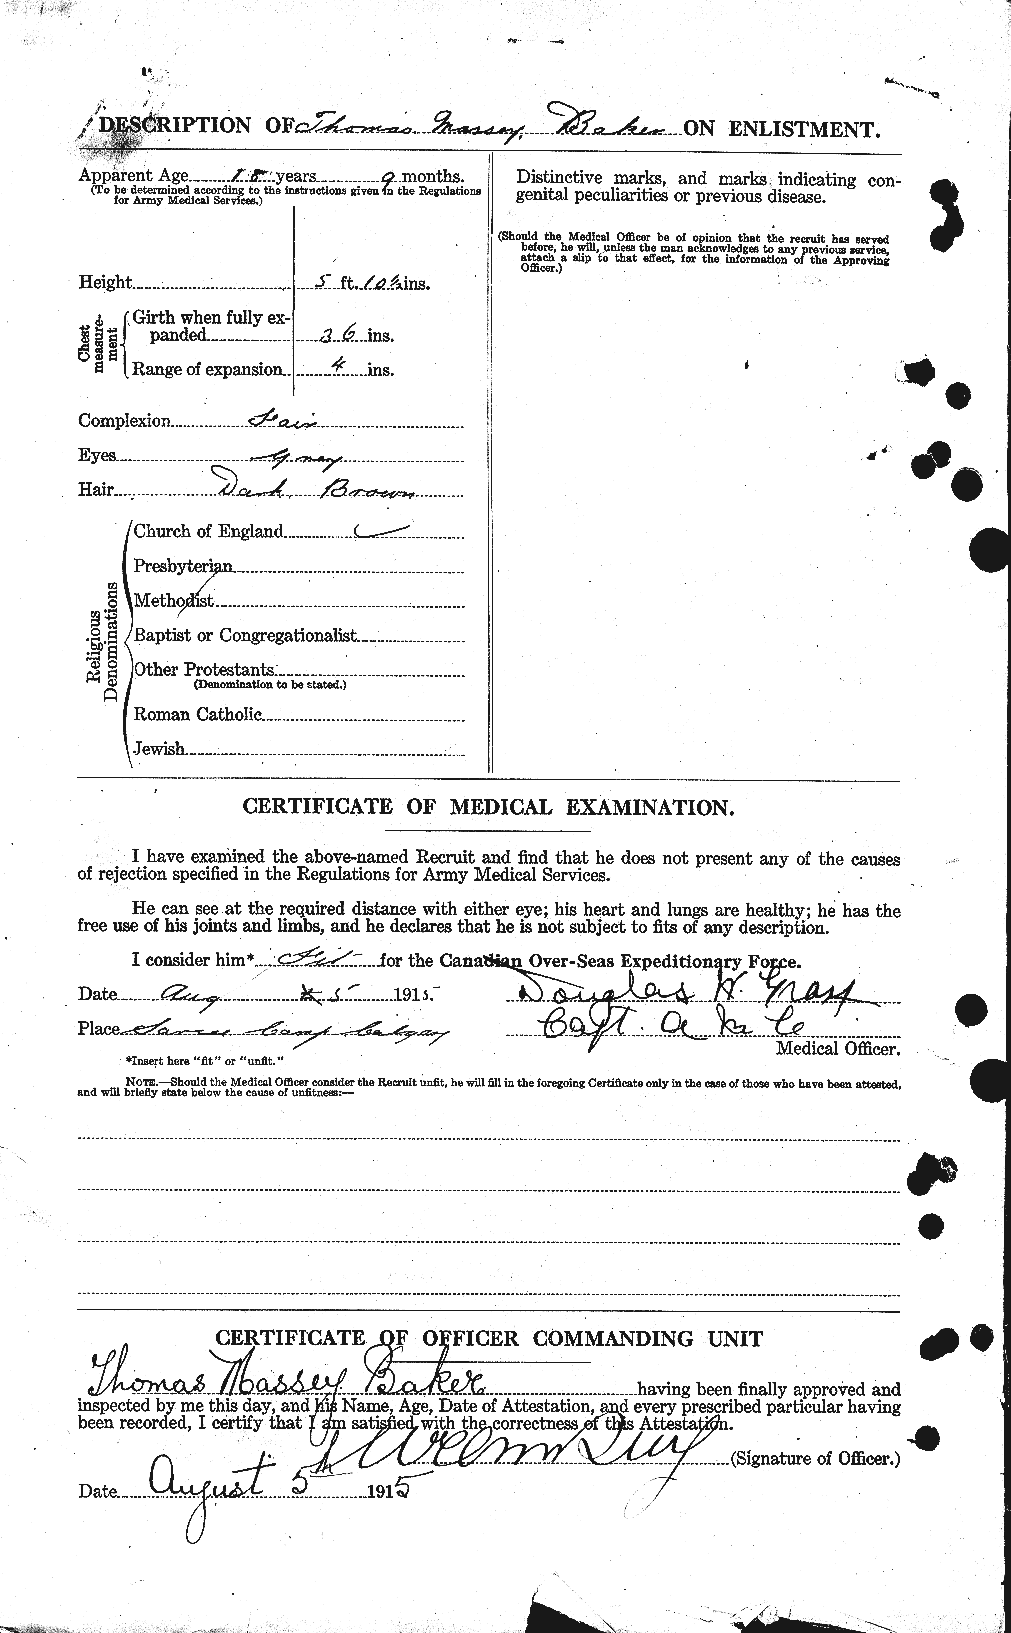 Personnel Records of the First World War - CEF 221445b